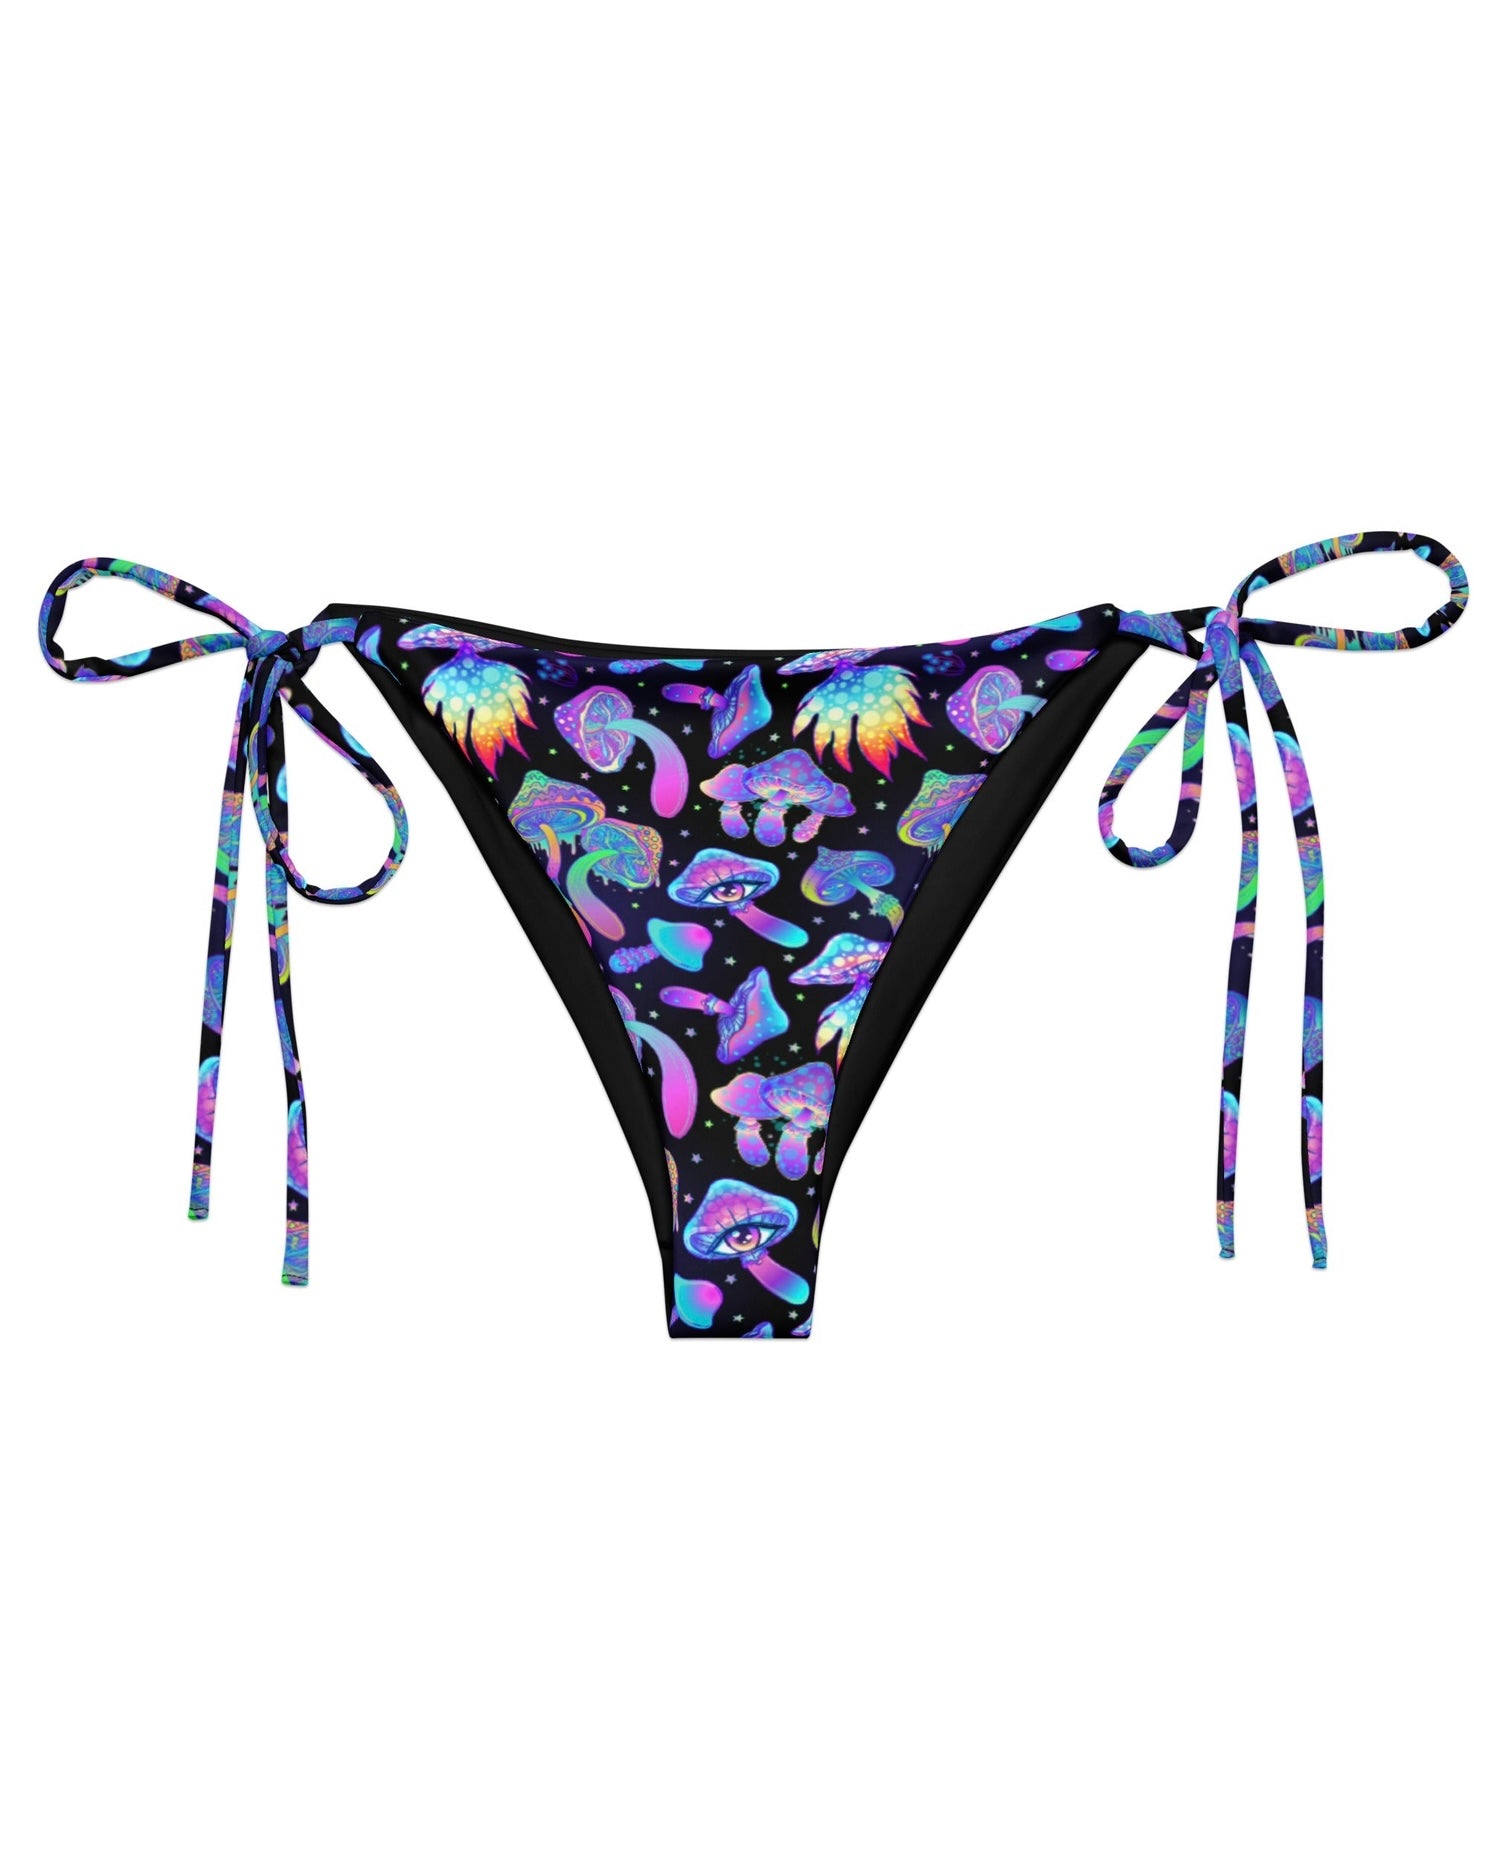 Shroomin Black String Bottoms by One Stop Rave on a white background.